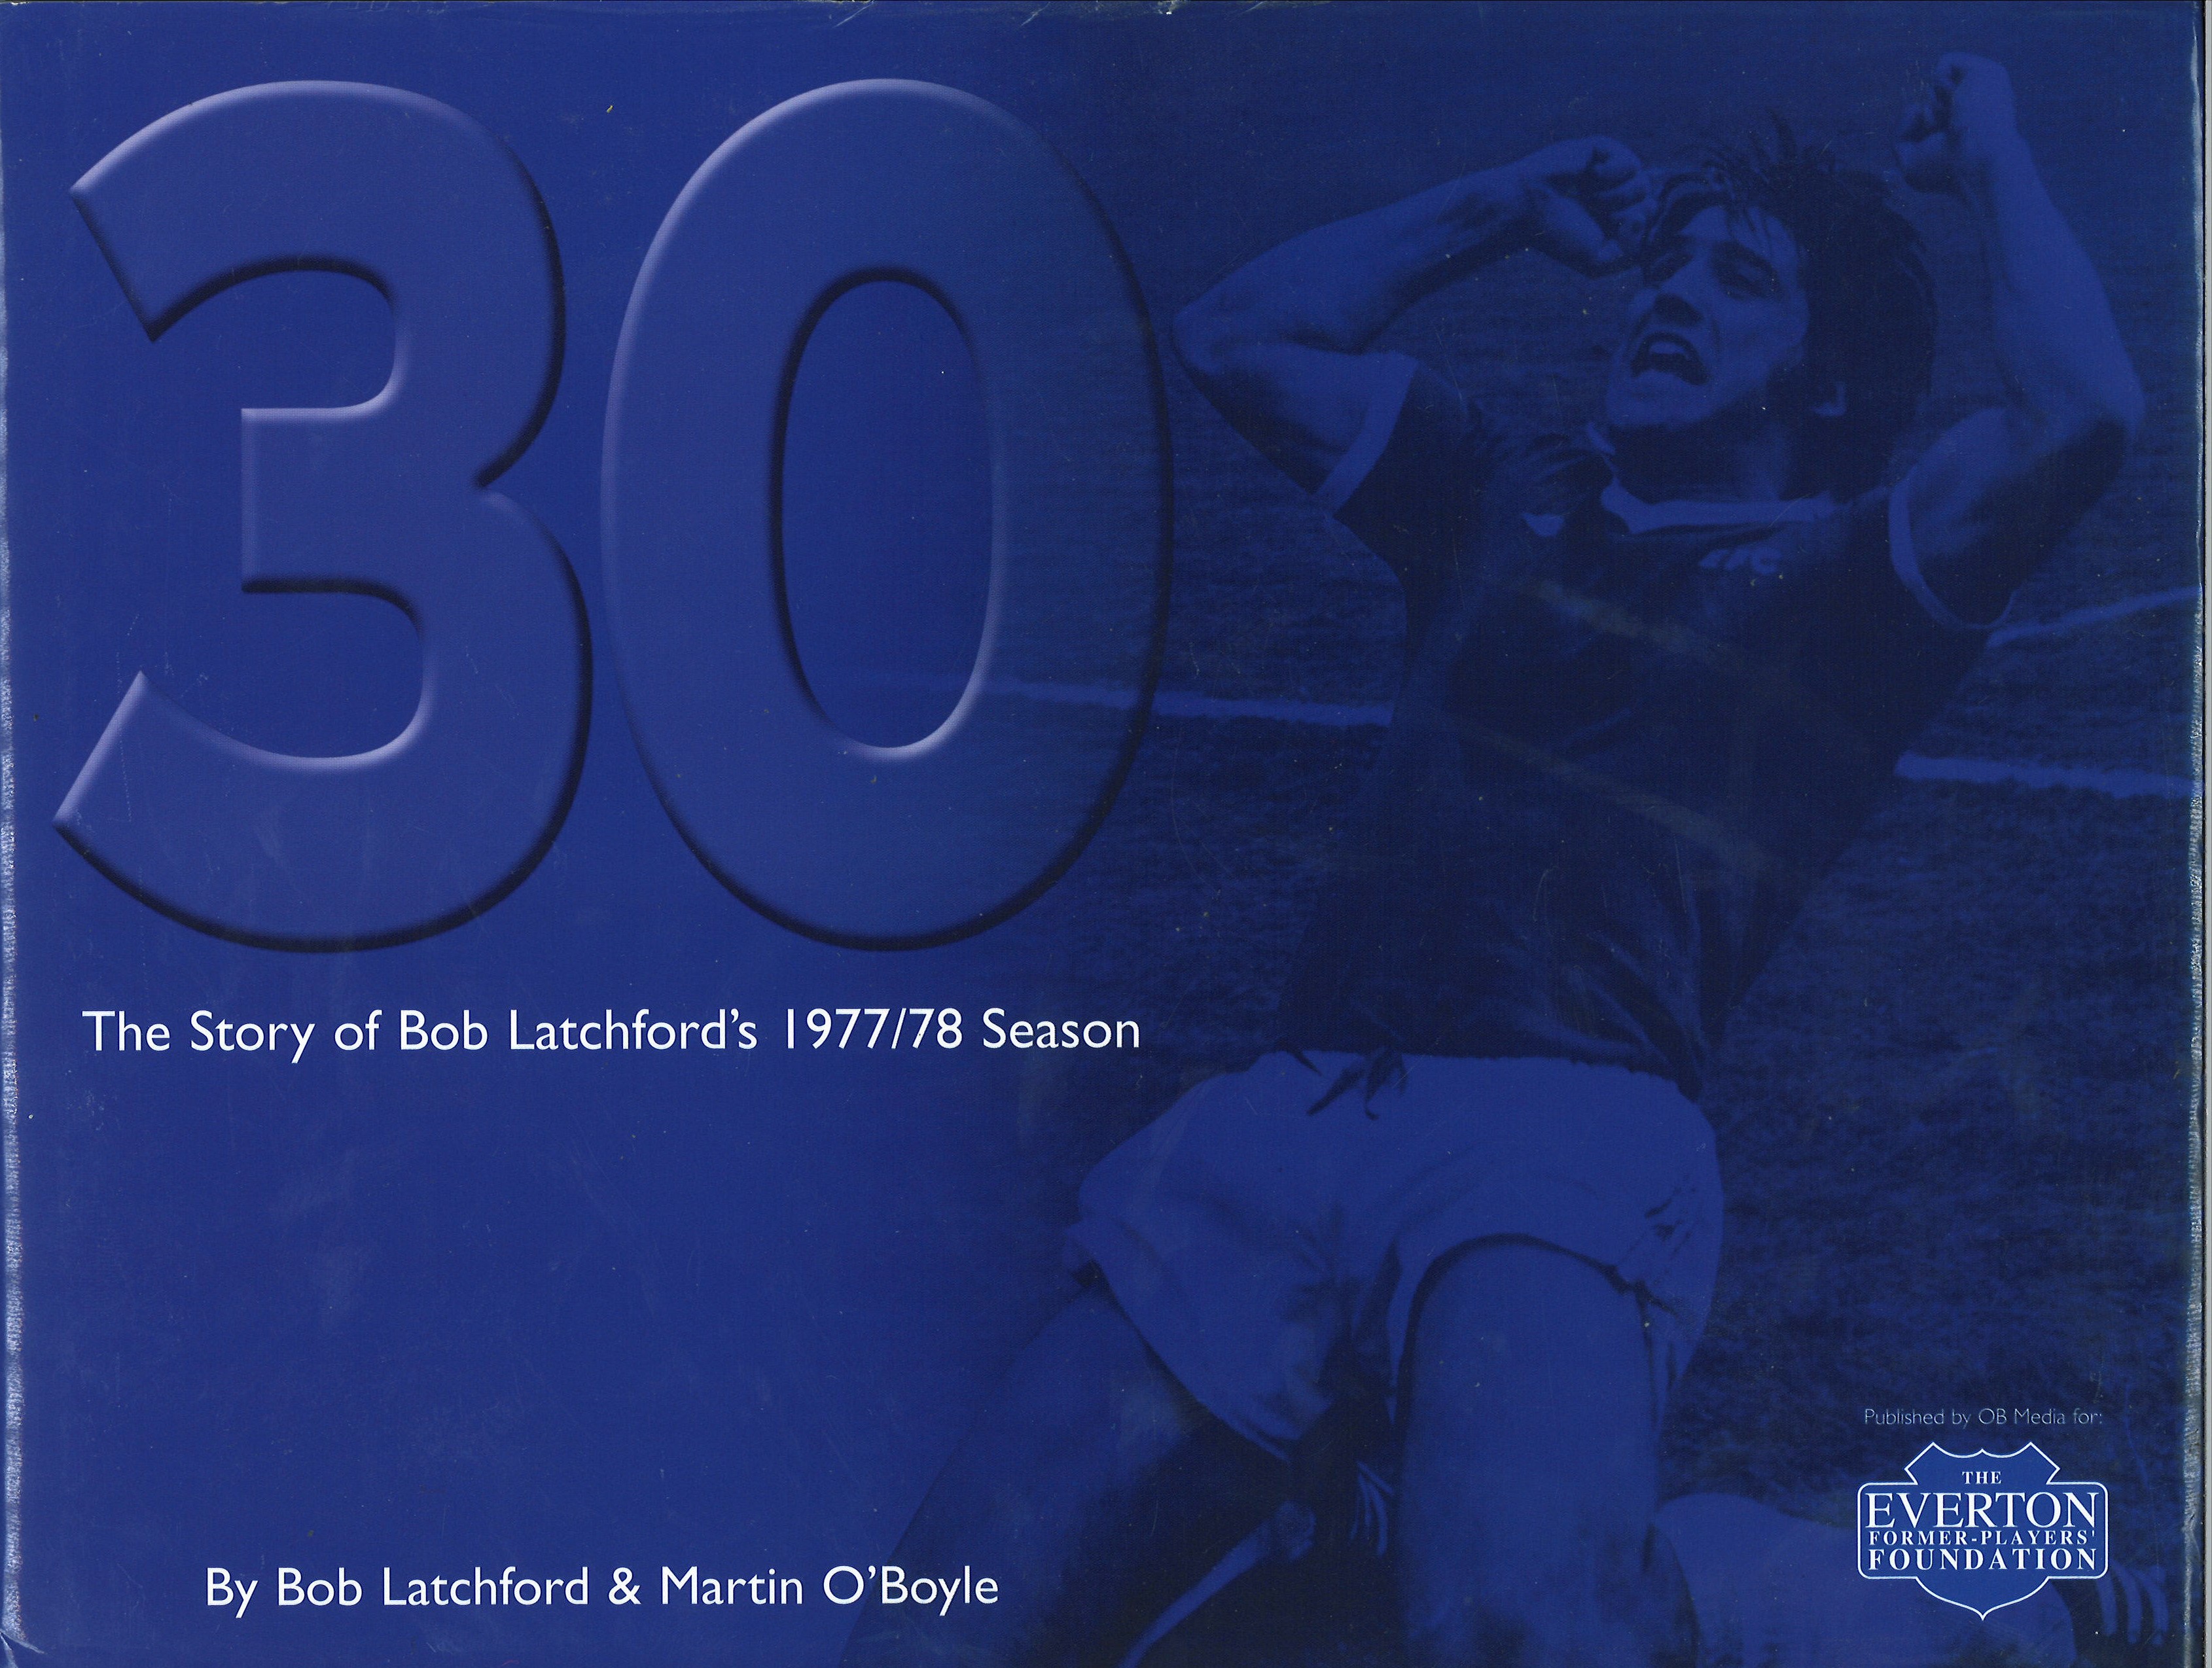 Bob Latchford signed hardback book titled 30 Everton. Good Condition. All autographs are genuine - Image 2 of 2